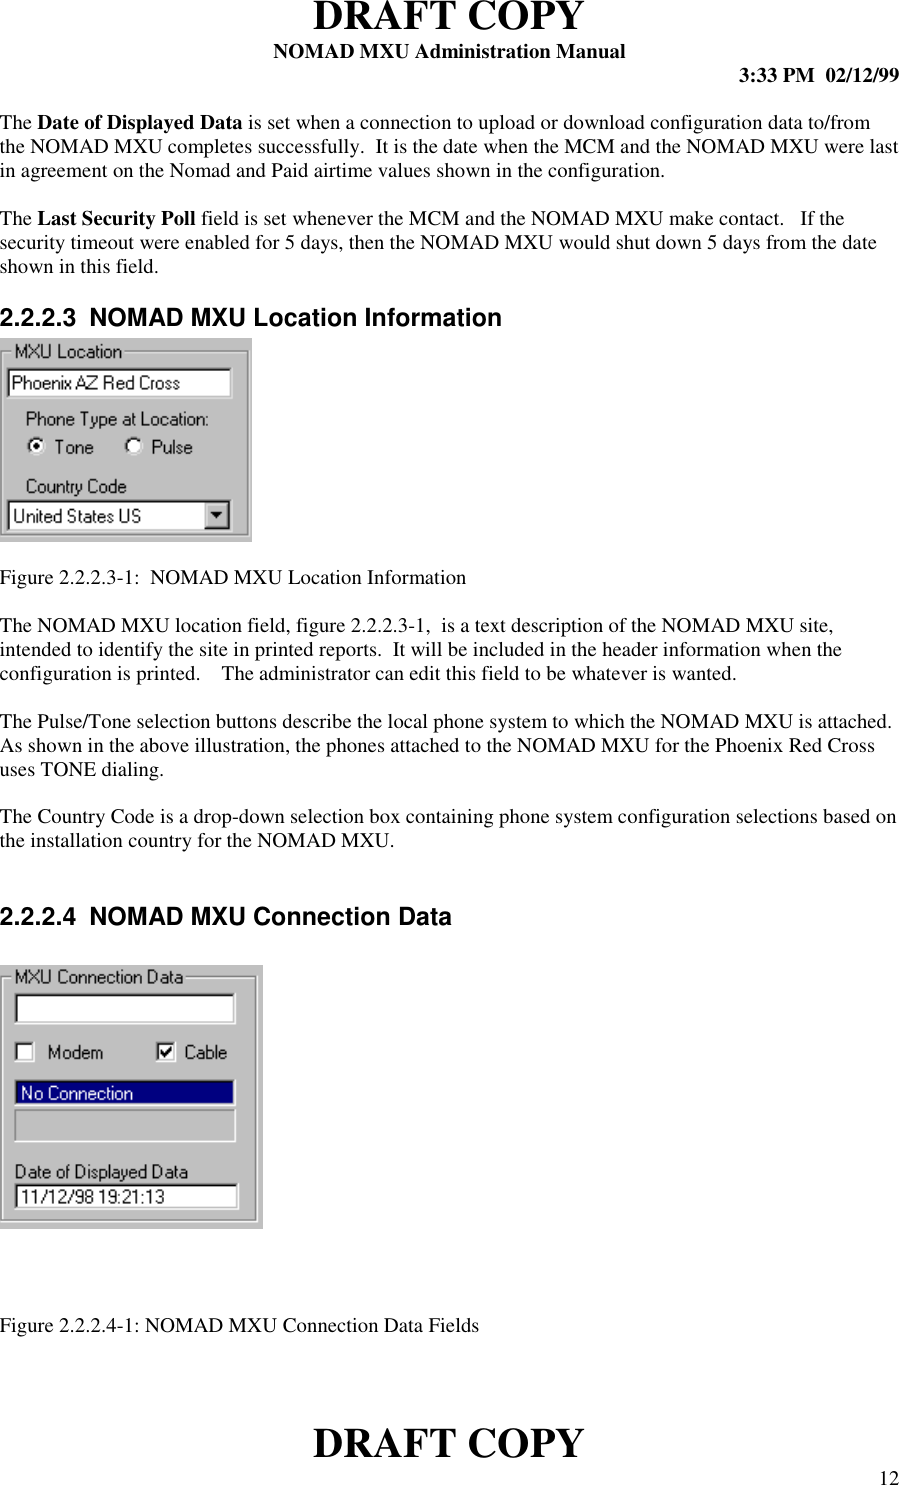 DRAFT COPYNOMAD MXU Administration Manual 3:33 PM  02/12/99DRAFT COPY 12The Date of Displayed Data is set when a connection to upload or download configuration data to/fromthe NOMAD MXU completes successfully.  It is the date when the MCM and the NOMAD MXU were lastin agreement on the Nomad and Paid airtime values shown in the configuration.The Last Security Poll field is set whenever the MCM and the NOMAD MXU make contact.   If thesecurity timeout were enabled for 5 days, then the NOMAD MXU would shut down 5 days from the dateshown in this field.2.2.2.3  NOMAD MXU Location InformationFigure 2.2.2.3-1:  NOMAD MXU Location InformationThe NOMAD MXU location field, figure 2.2.2.3-1,  is a text description of the NOMAD MXU site,intended to identify the site in printed reports.  It will be included in the header information when theconfiguration is printed.    The administrator can edit this field to be whatever is wanted.The Pulse/Tone selection buttons describe the local phone system to which the NOMAD MXU is attached.As shown in the above illustration, the phones attached to the NOMAD MXU for the Phoenix Red Crossuses TONE dialing.The Country Code is a drop-down selection box containing phone system configuration selections based onthe installation country for the NOMAD MXU.2.2.2.4  NOMAD MXU Connection DataFigure 2.2.2.4-1: NOMAD MXU Connection Data Fields